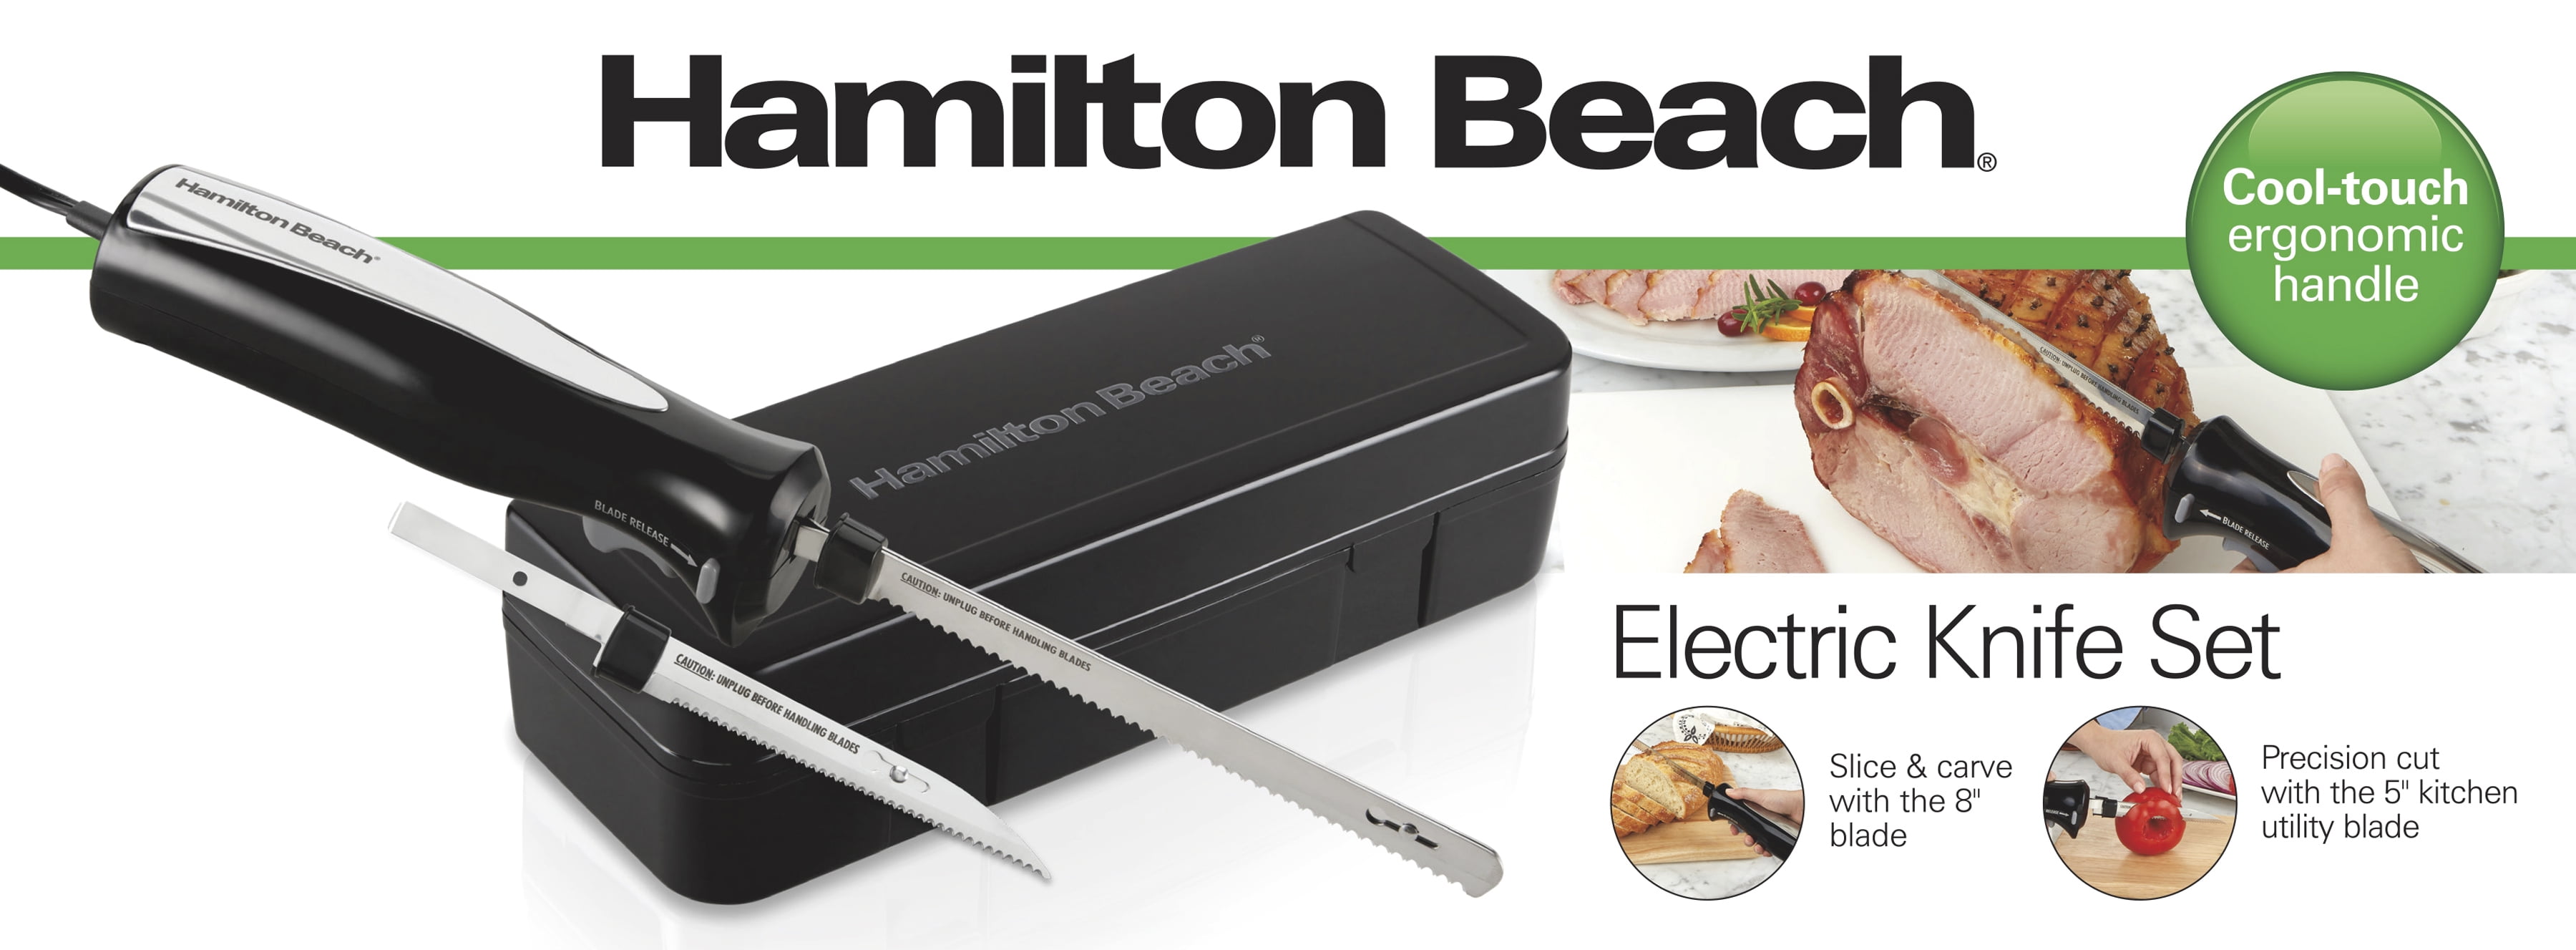 Hamilton Beach Electric Knife Set for Carving Meats, Poultry, Bread,  Crafting Foam & More, Reciprocating Serrated Stainless Steel Blades,  Ergonomic